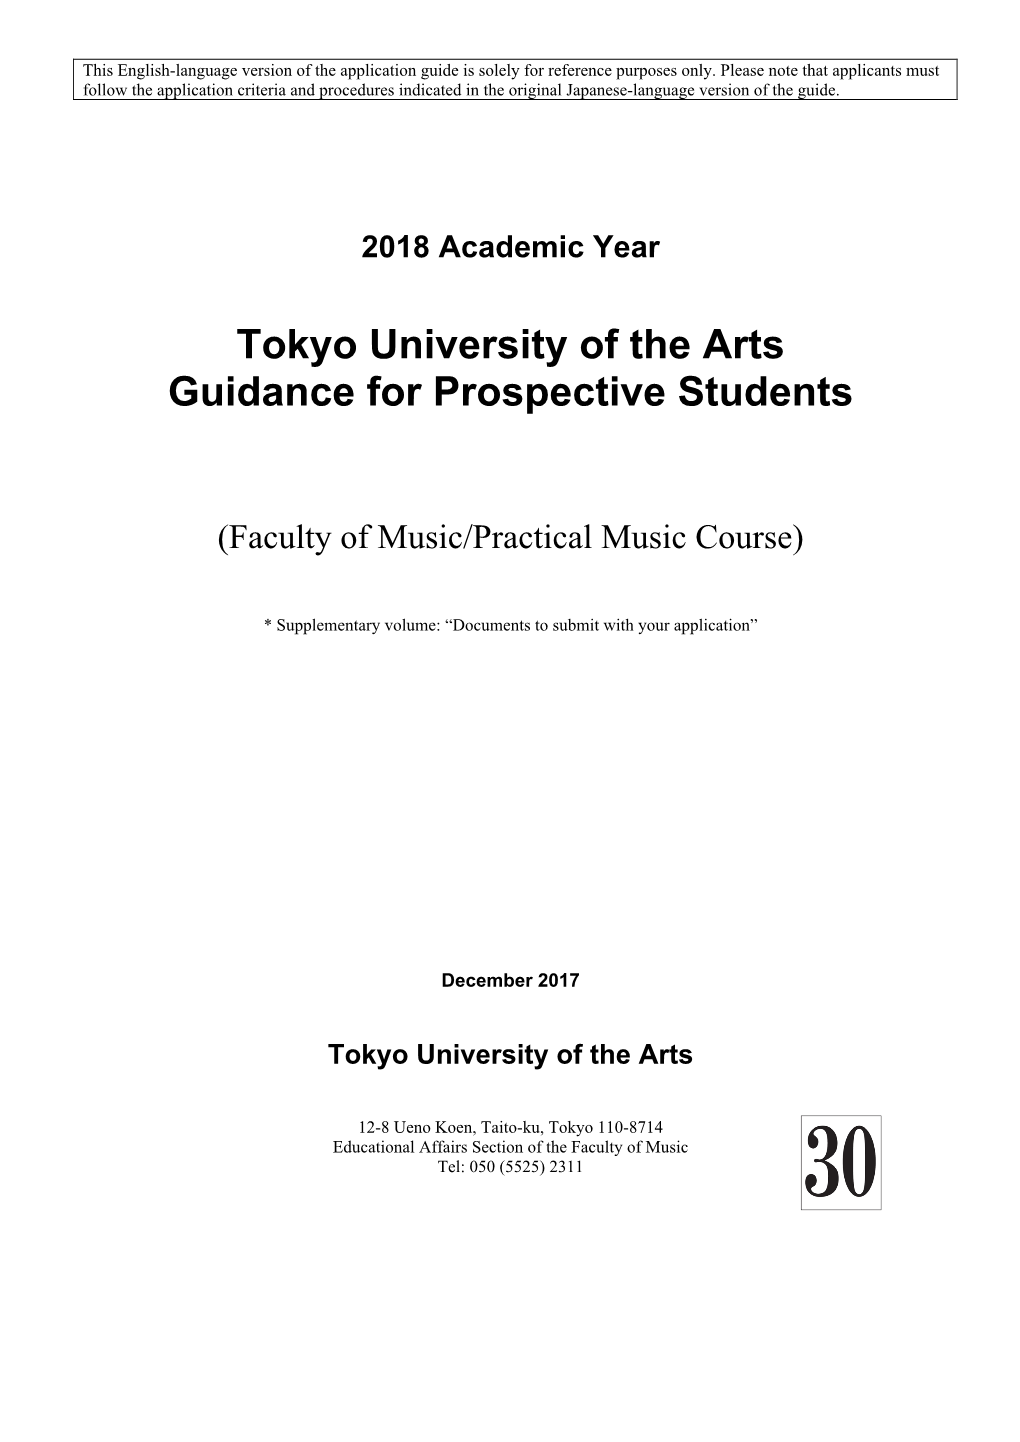 Tokyo University of the Arts Guidance for Prospective Students